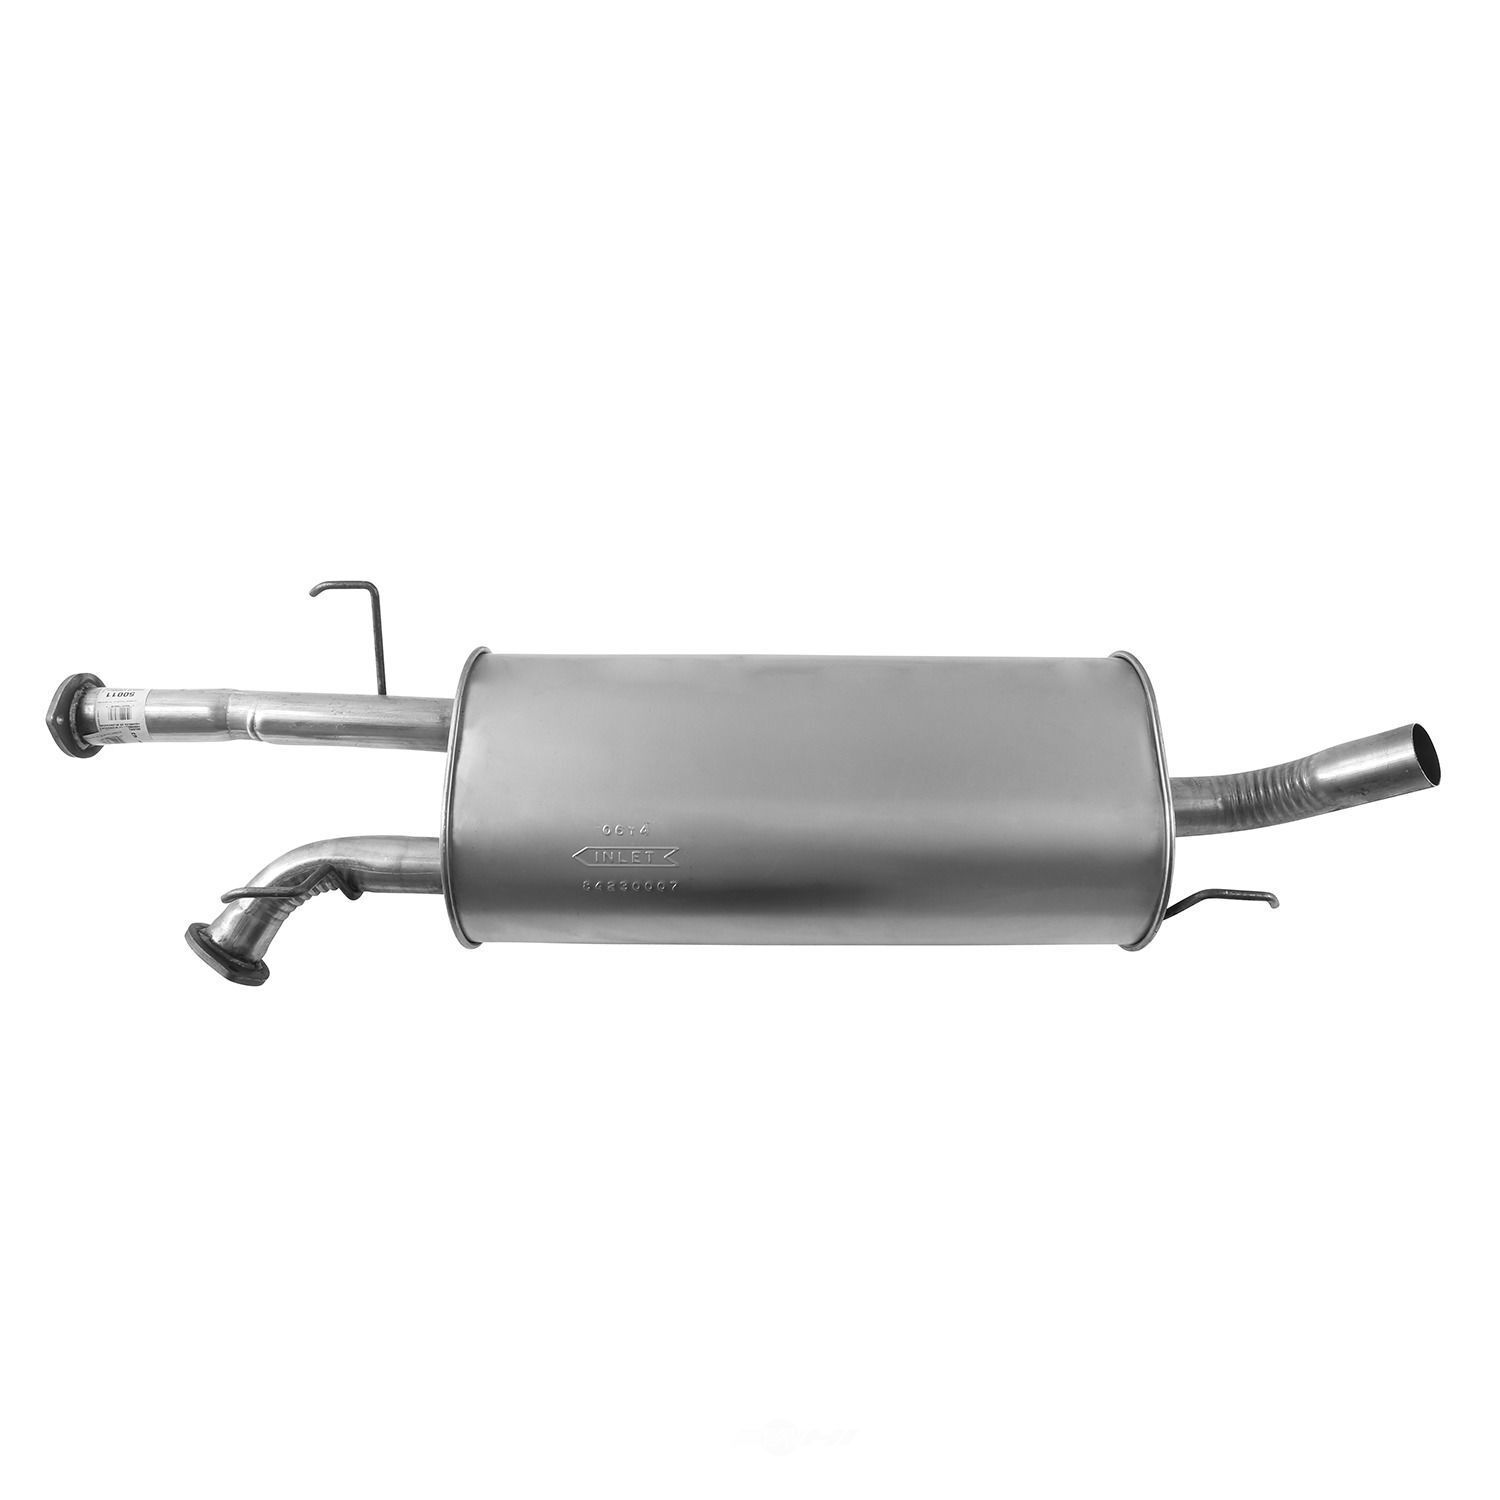 Exhaust Muffler Assembly AP Exhaust 50011 fits 08-19 Toyota Sequoia